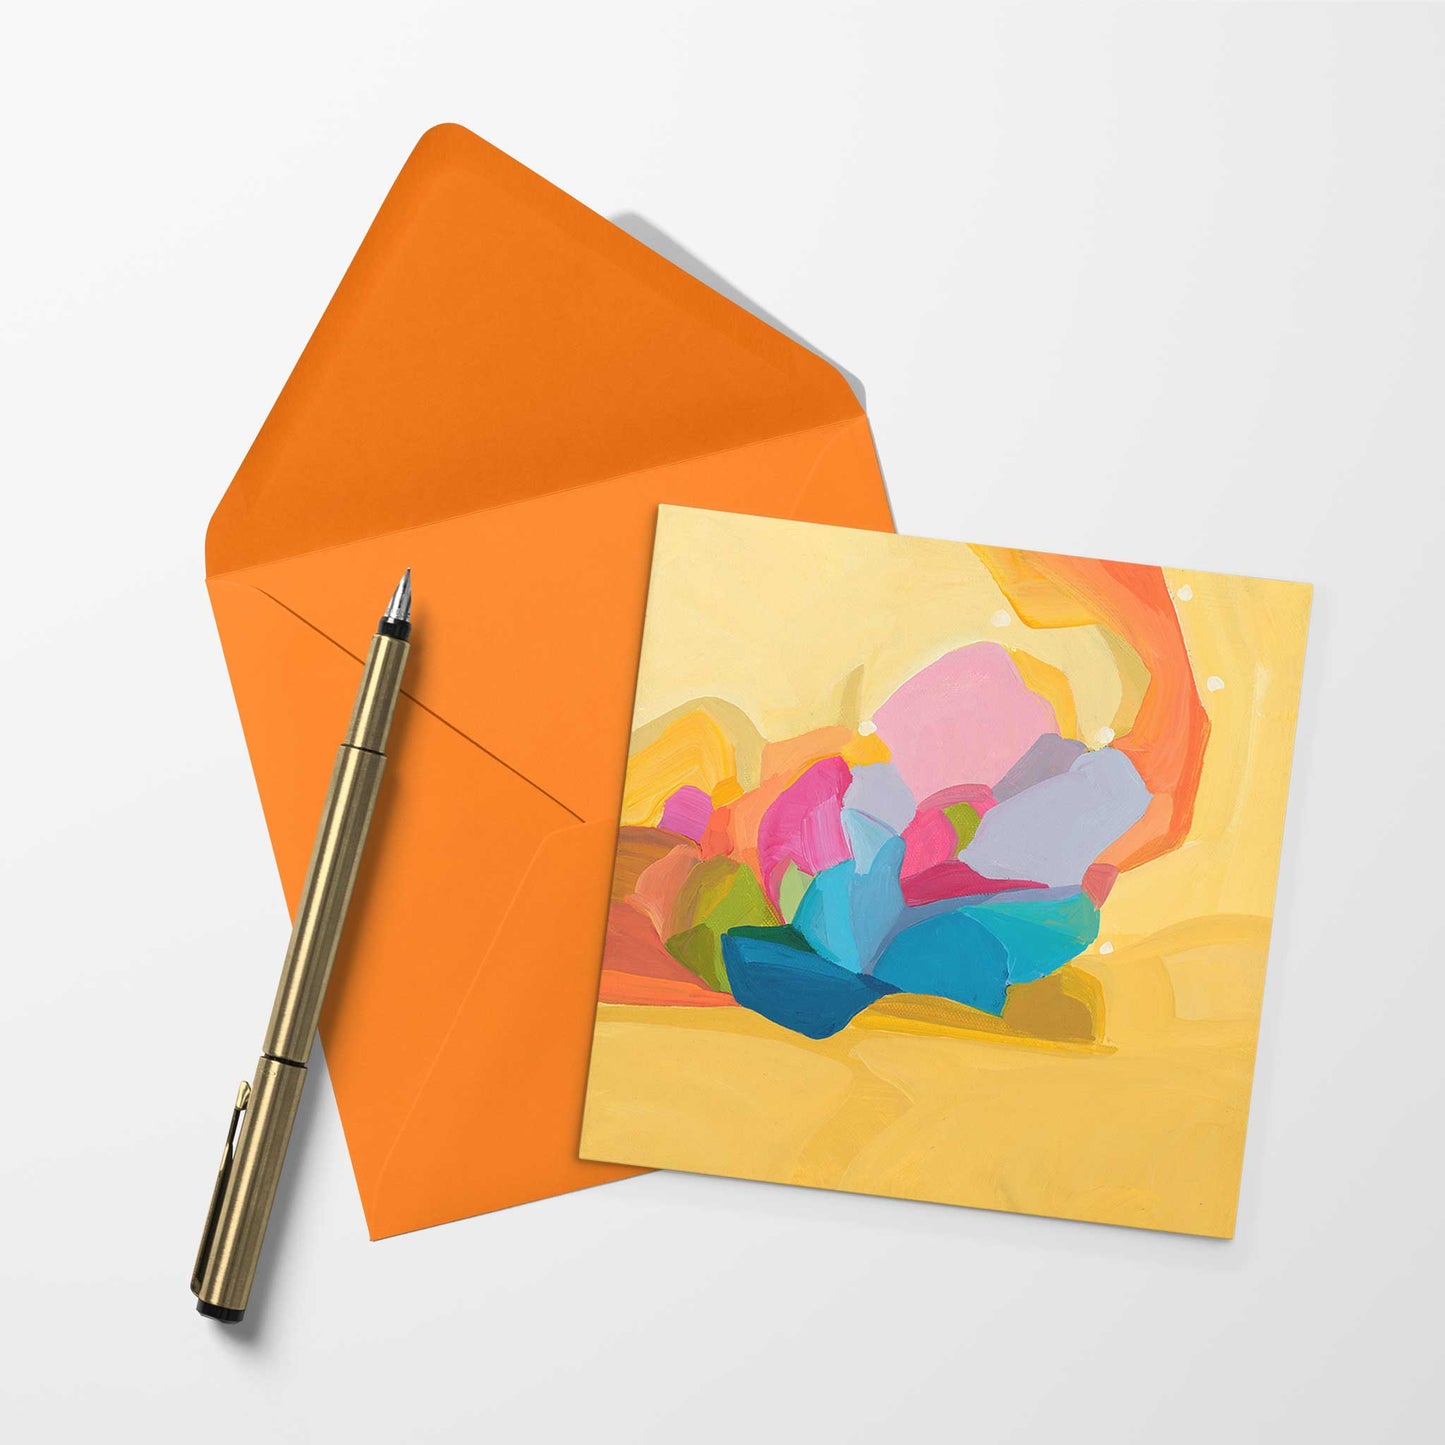 blank art card with yellow abstract design and orange envelope